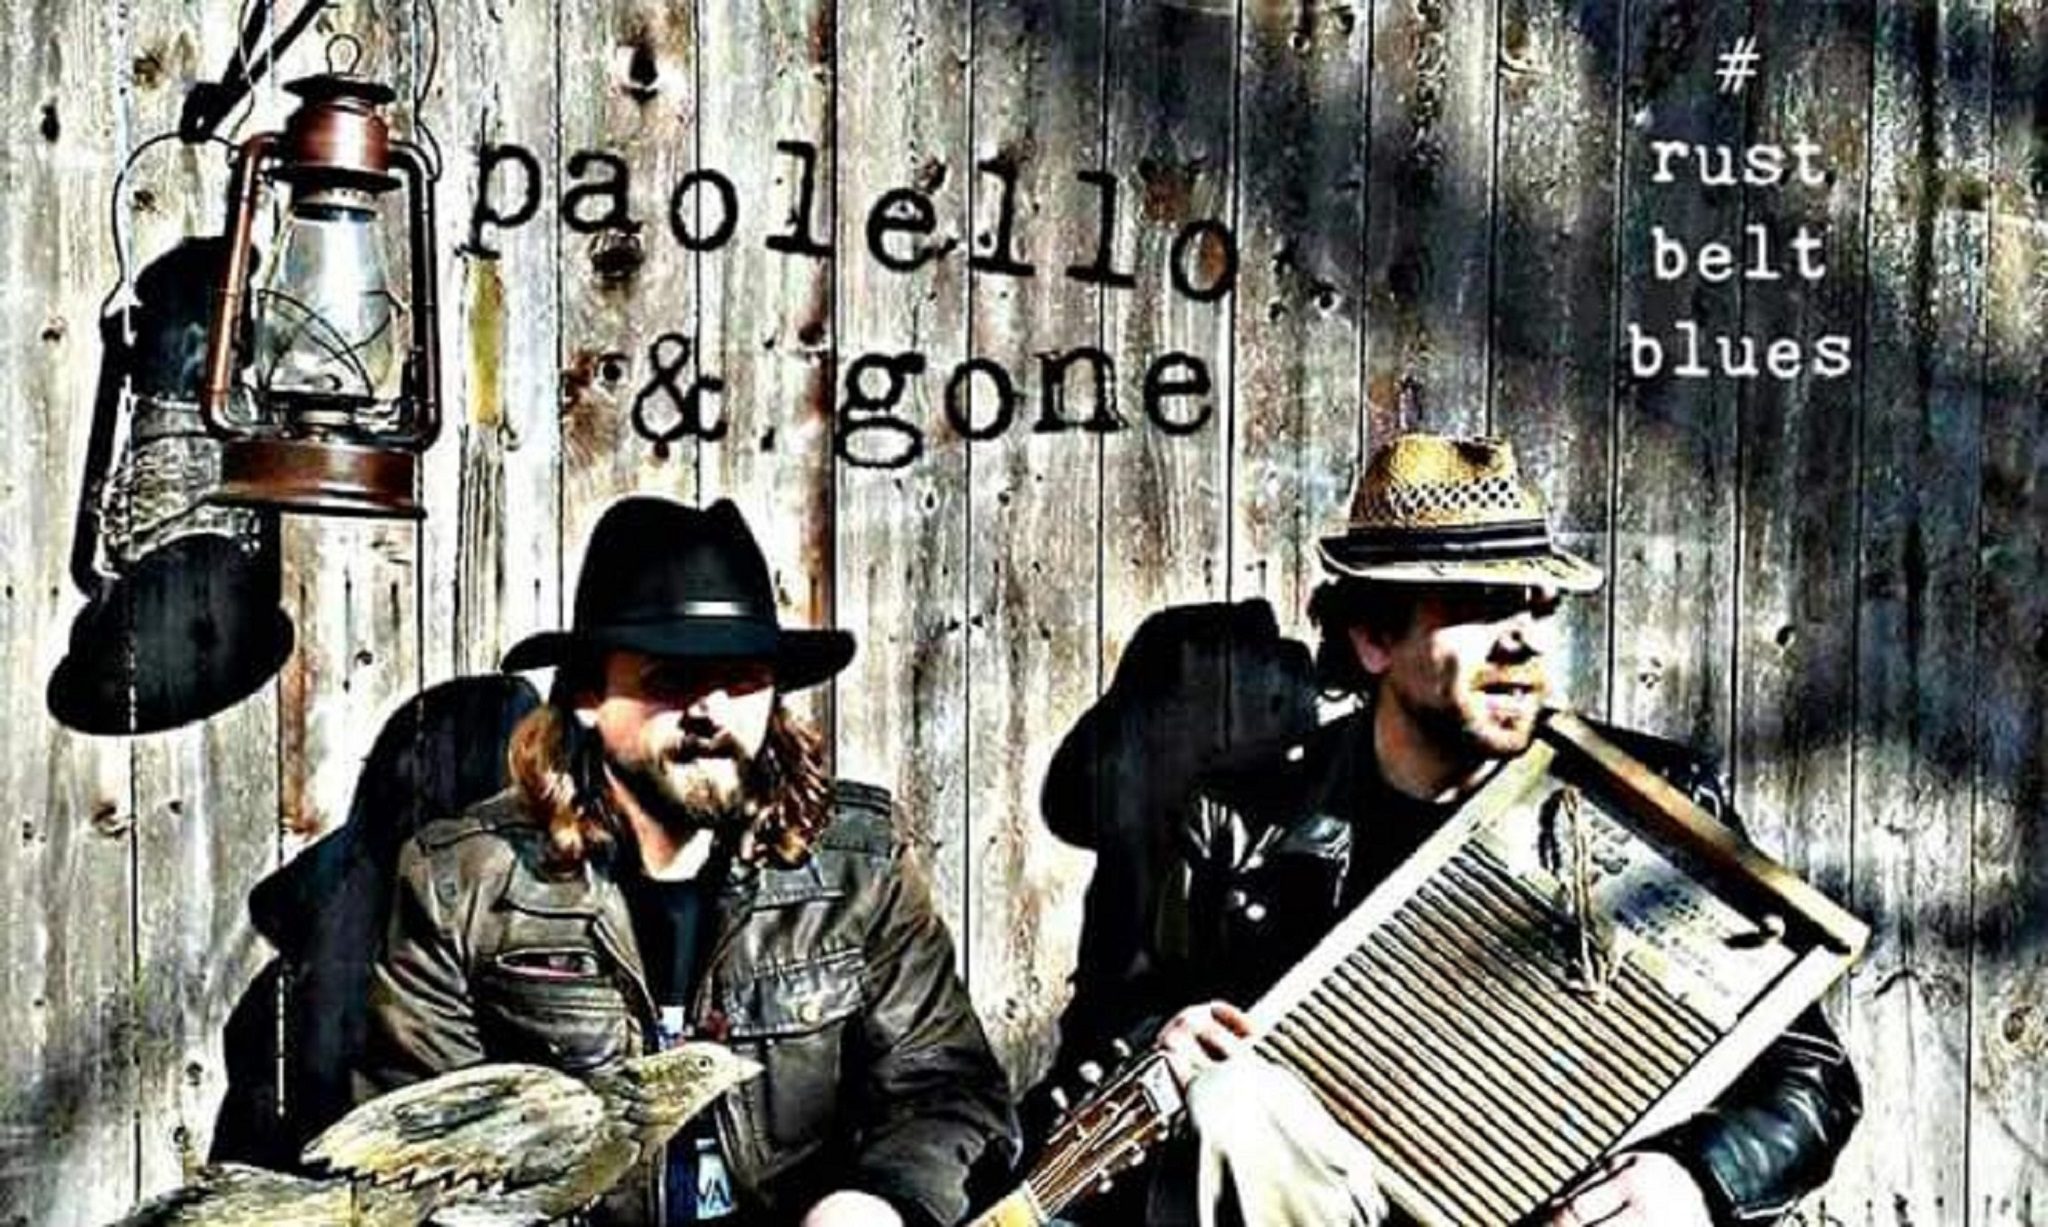 August Sunday Sesh with Paolello and Gone @ Mazza Chautauqua Cellars / Five & 20 Spirits & Brewing